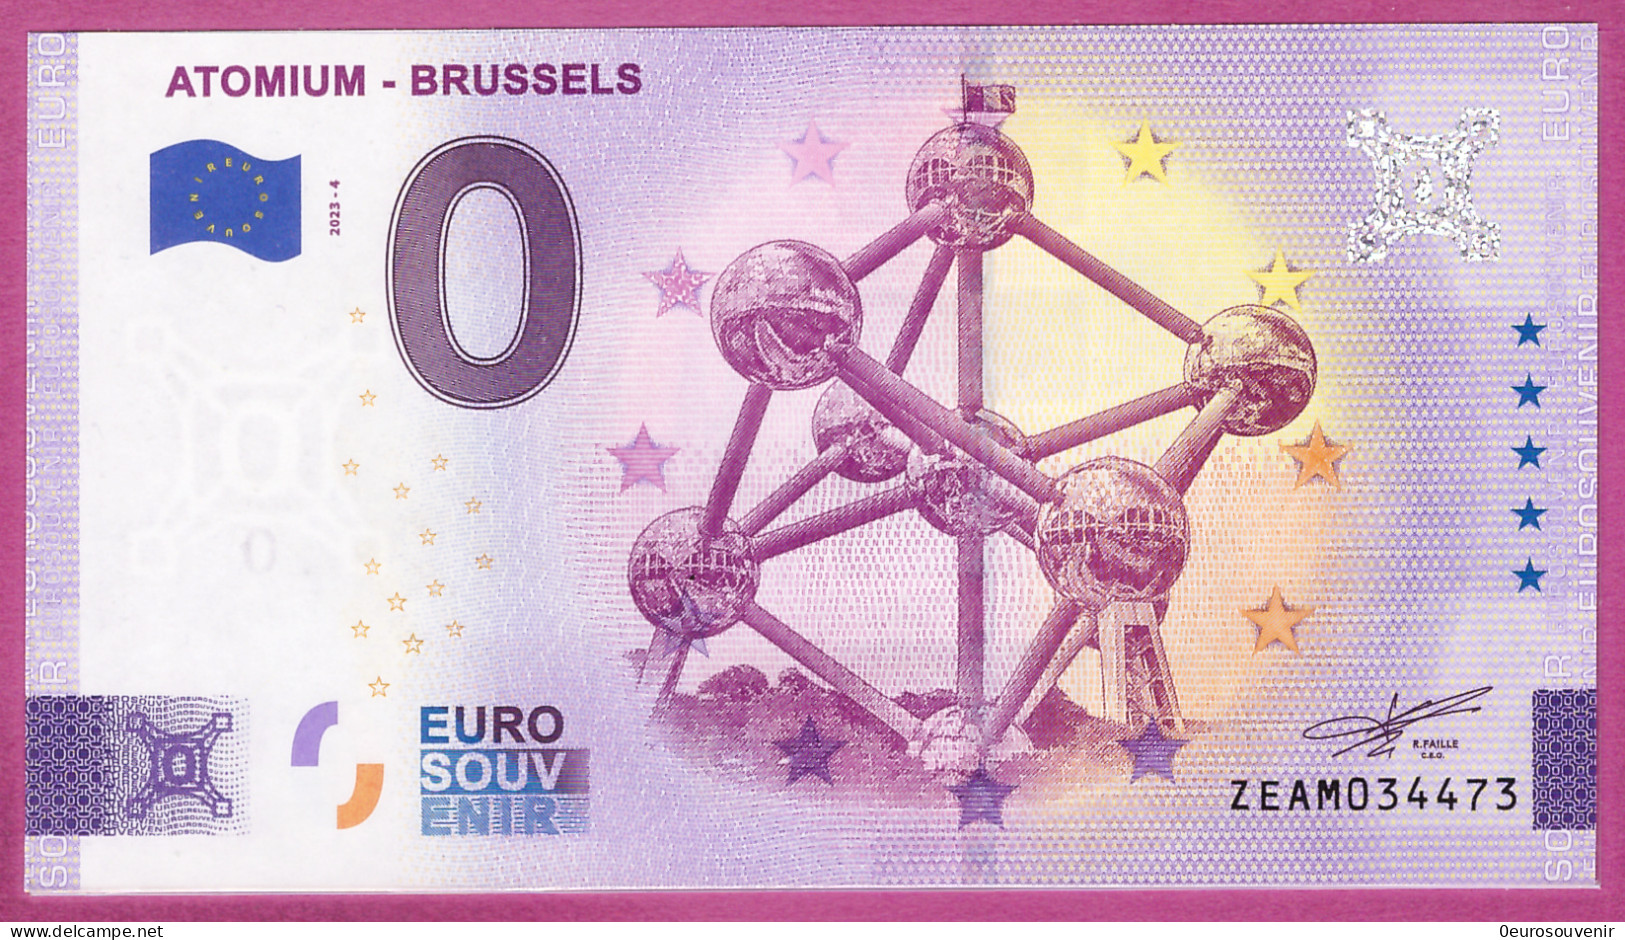 0-Euro ZEAM 2023-4  ATOMIUM - BRUSSELS - Private Proofs / Unofficial